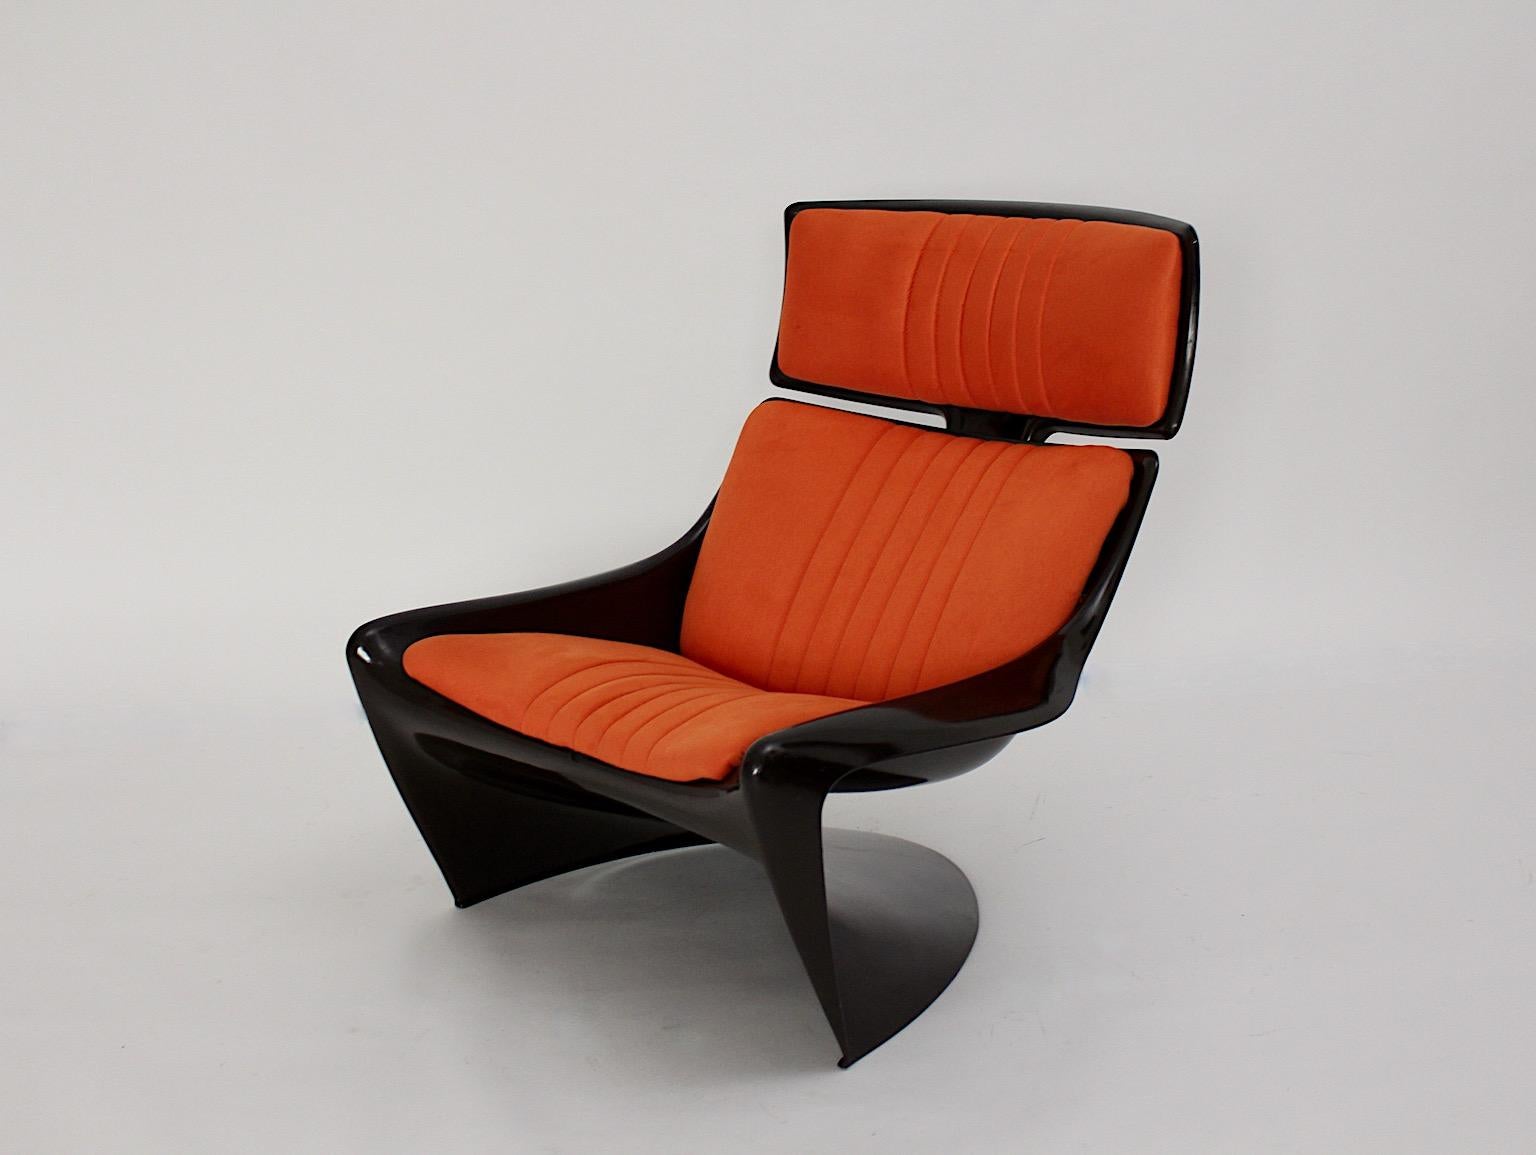 Space Age Vintage Brown Orange Plastic Lounge Chair Steen Ostergaard 1960s For Sale 7